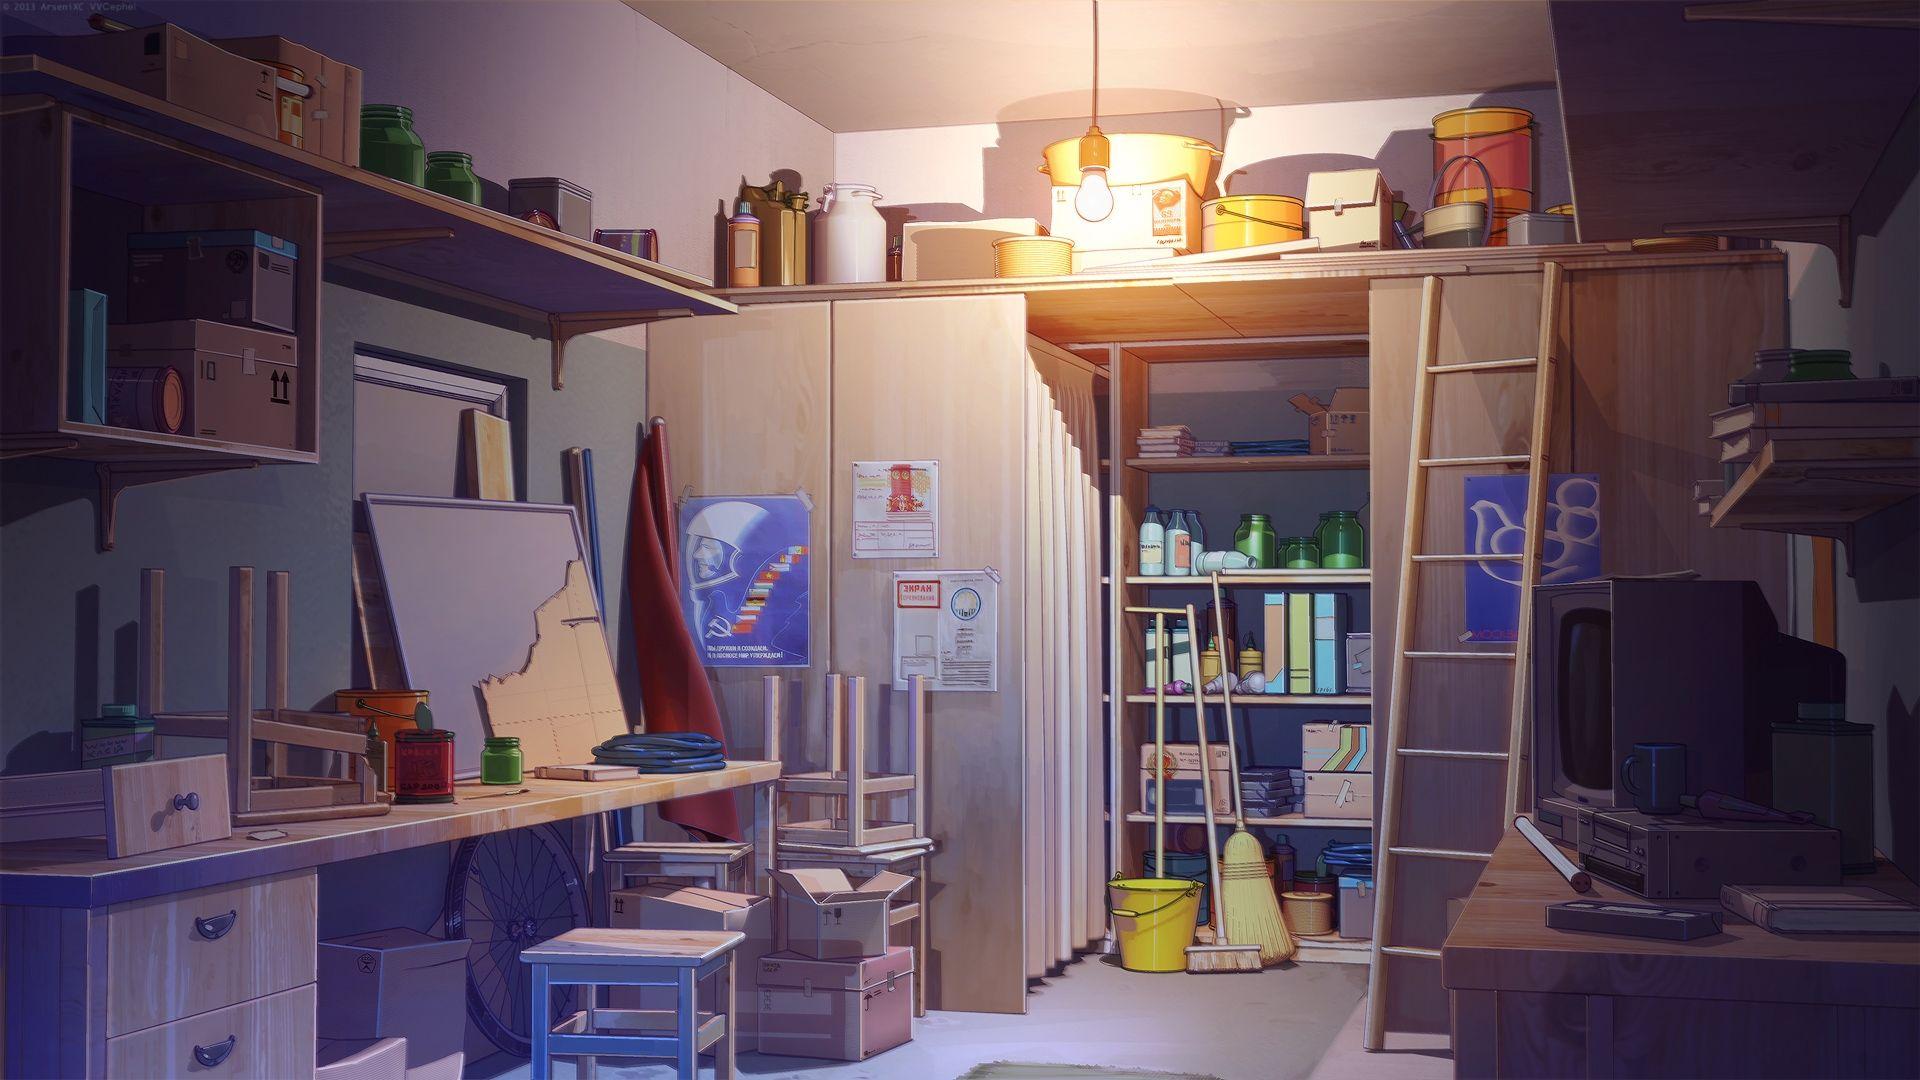 Anime Room Wallpapers Top Free Anime Room Backgrounds Wallpaperaccess Kai fine art is an art website shows painting and illustration works all over the world. anime room wallpapers top free anime